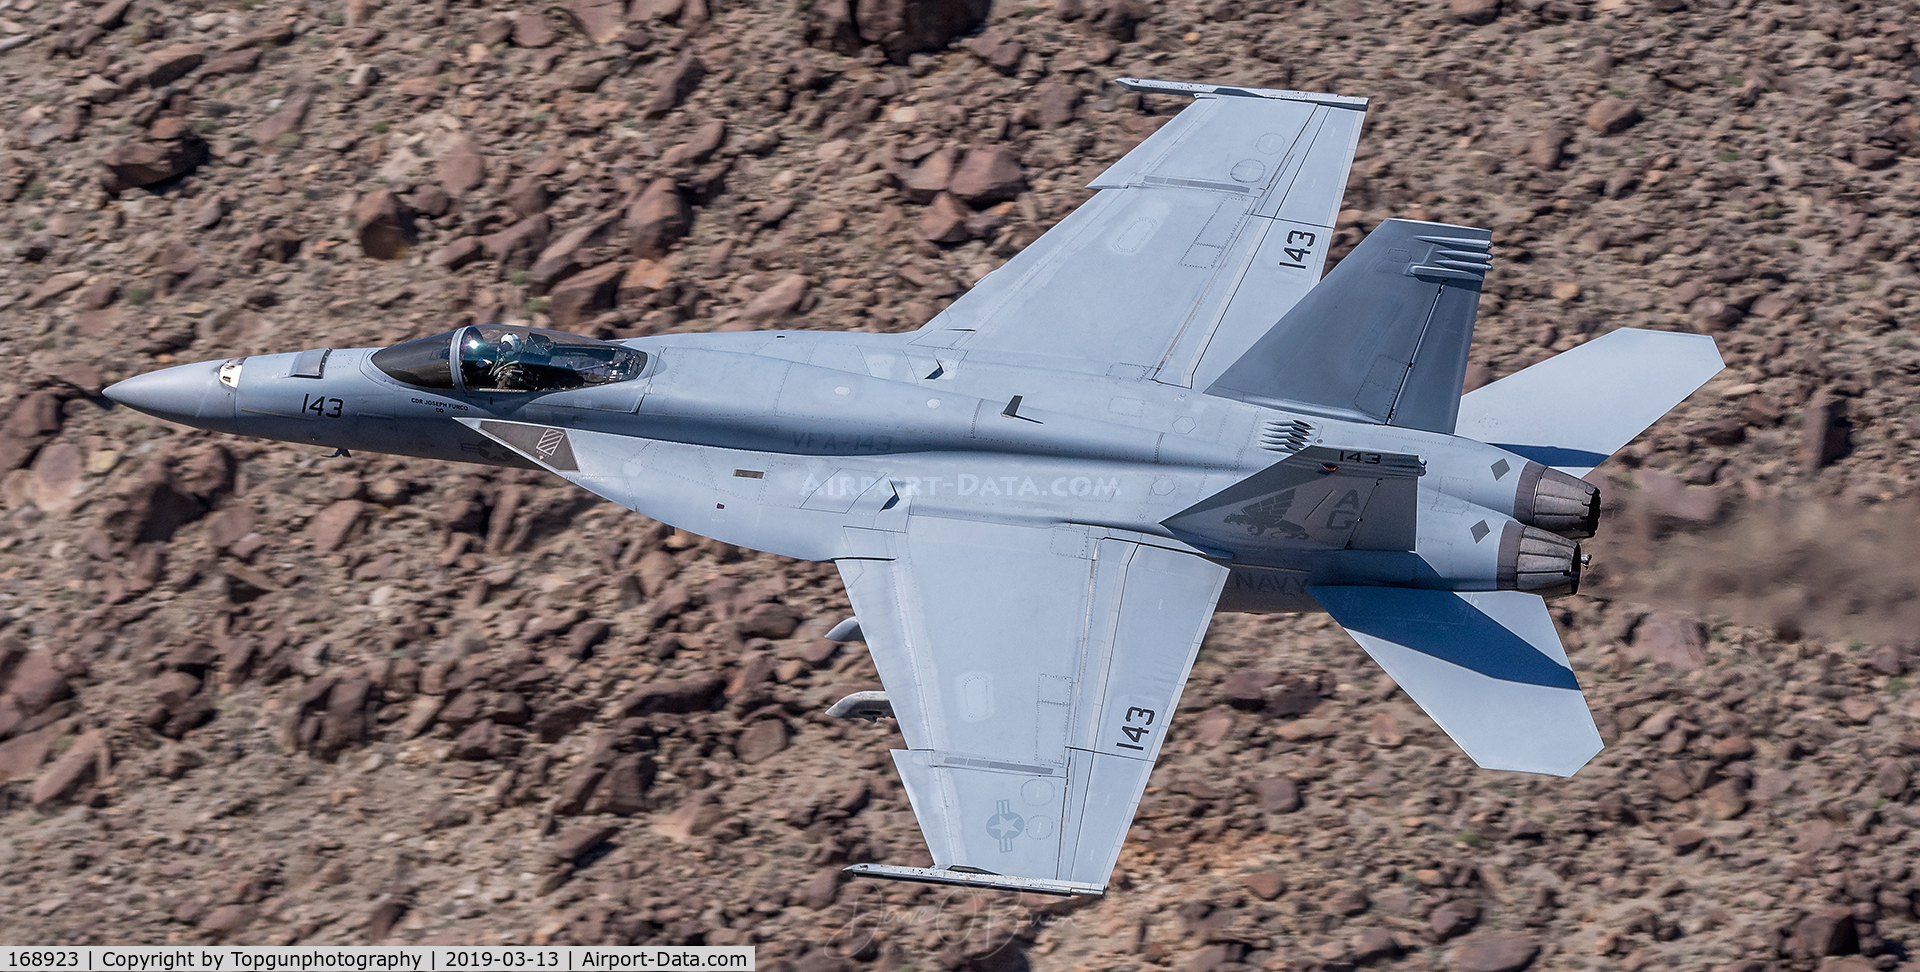 168923, Boeing F/A-18E Super Hornet C/N E282, NIGHT31 VFA-143 Pukin Dogs out of NAS Oceana flying through Star Wars Canyon